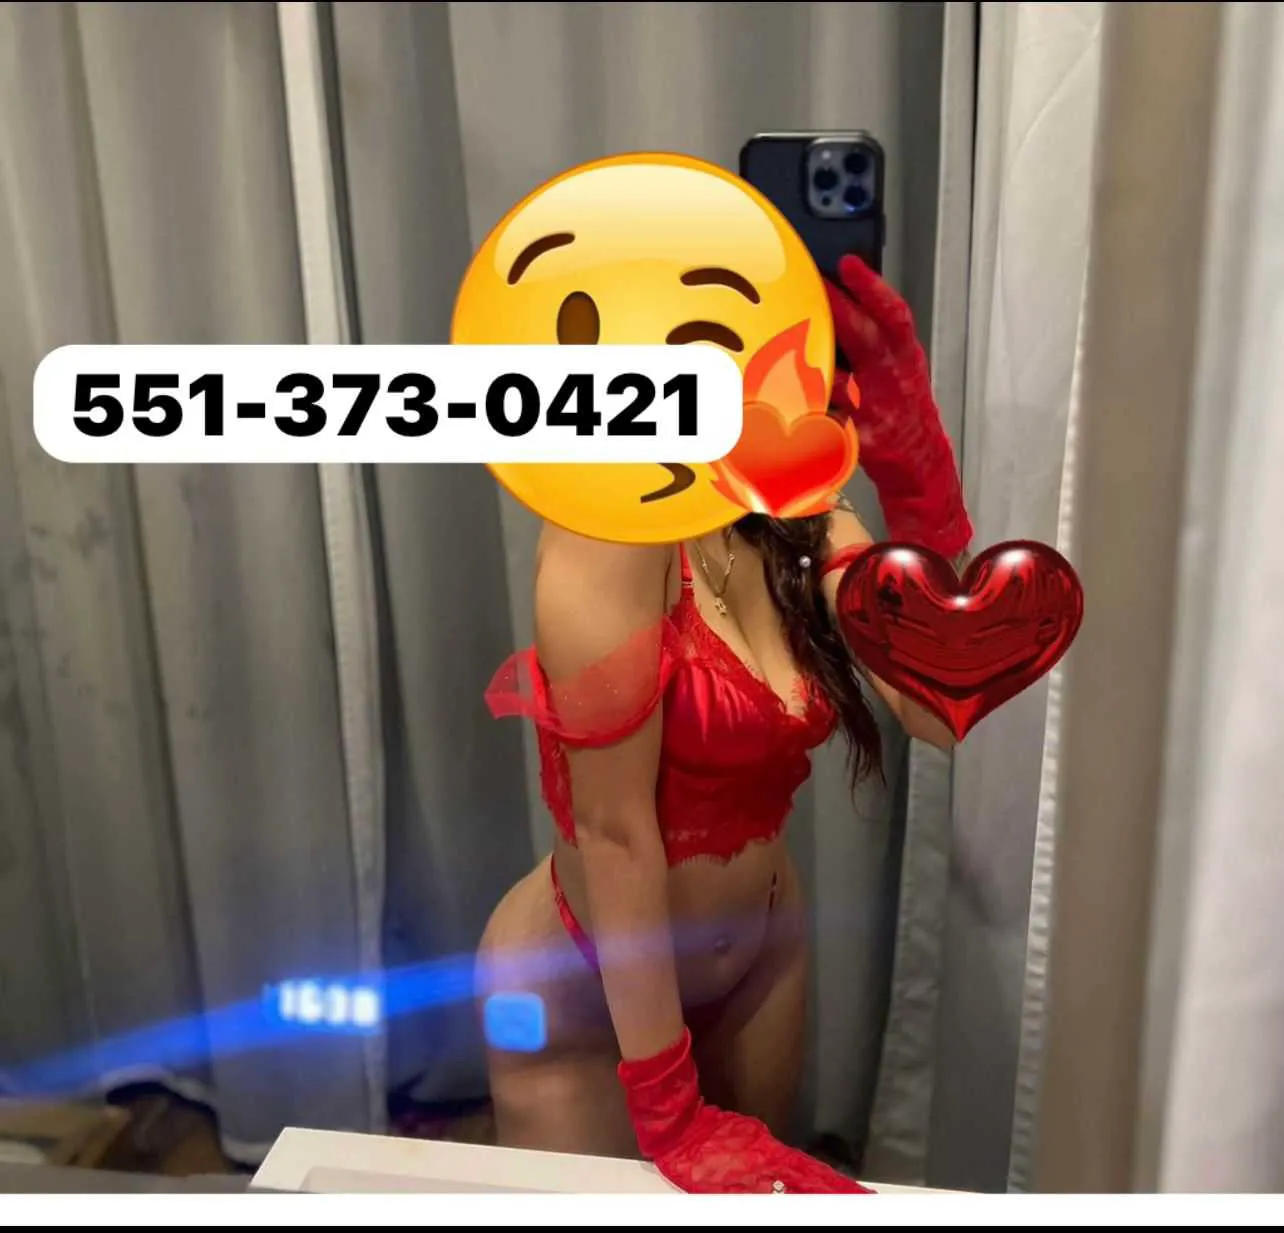 Reviews about escort with phone number 5513730496